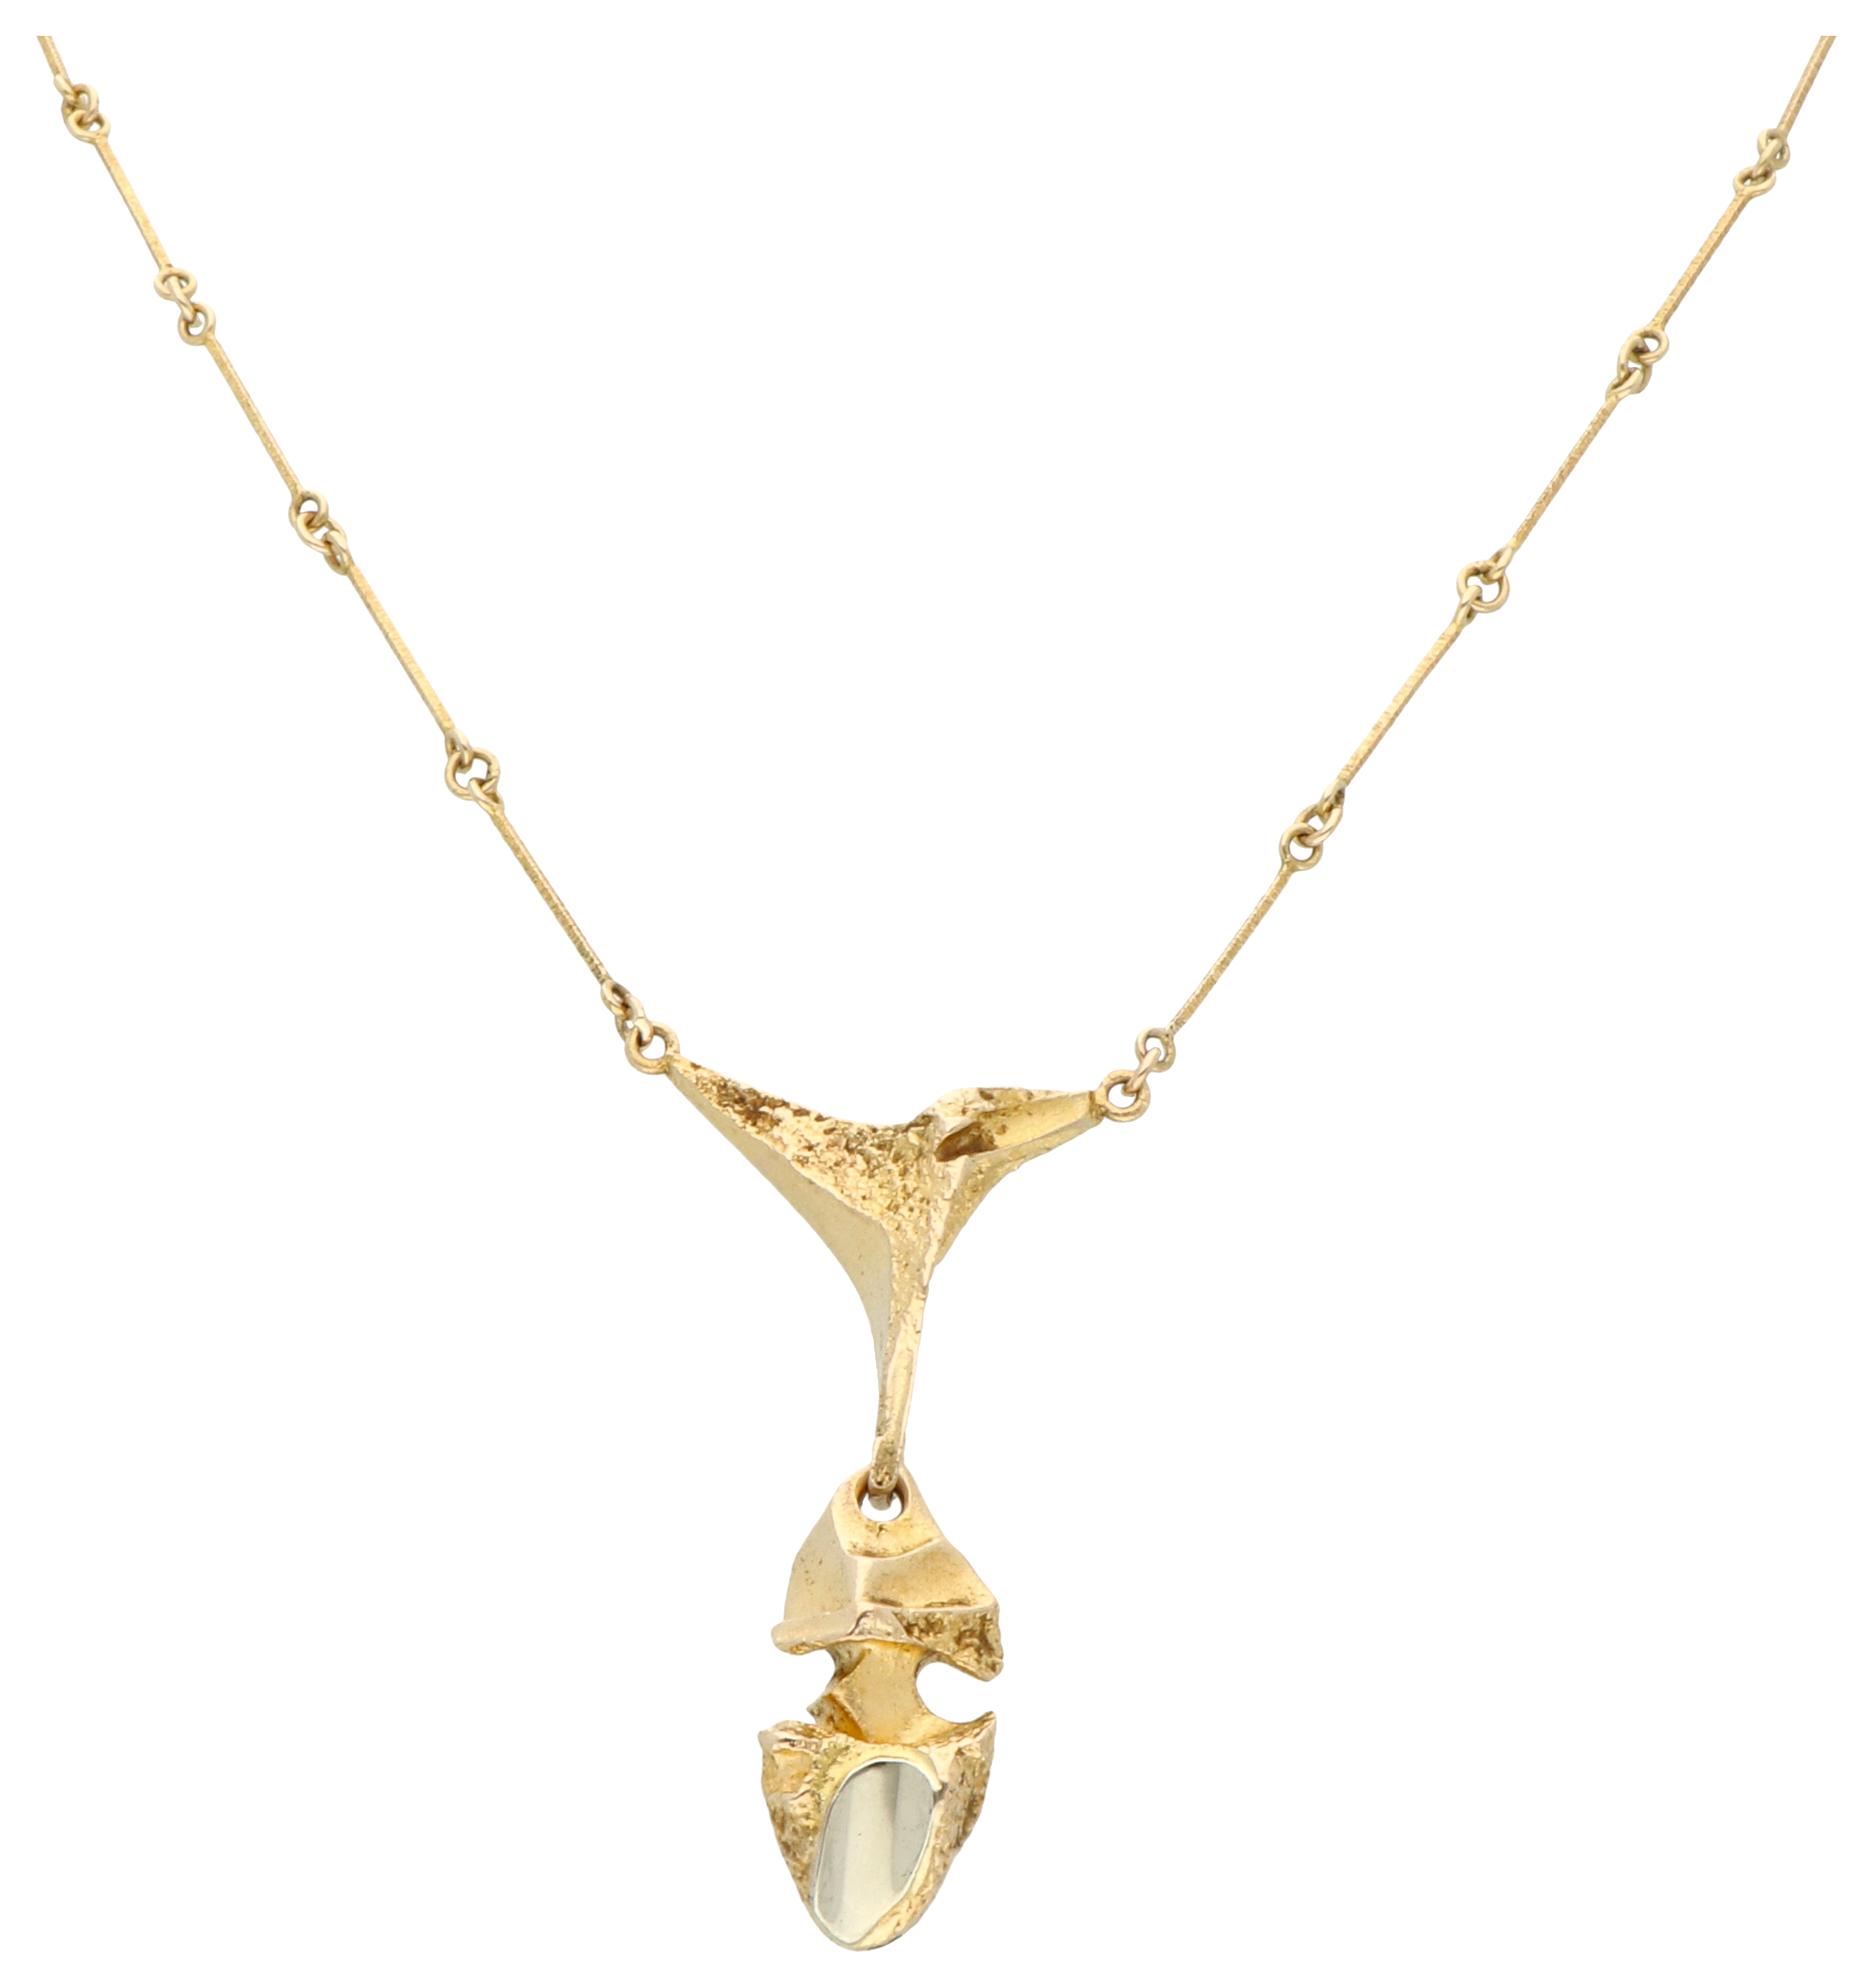 No Reserve - Lapponia 14K yellow gold Kaira pendant on necklace.